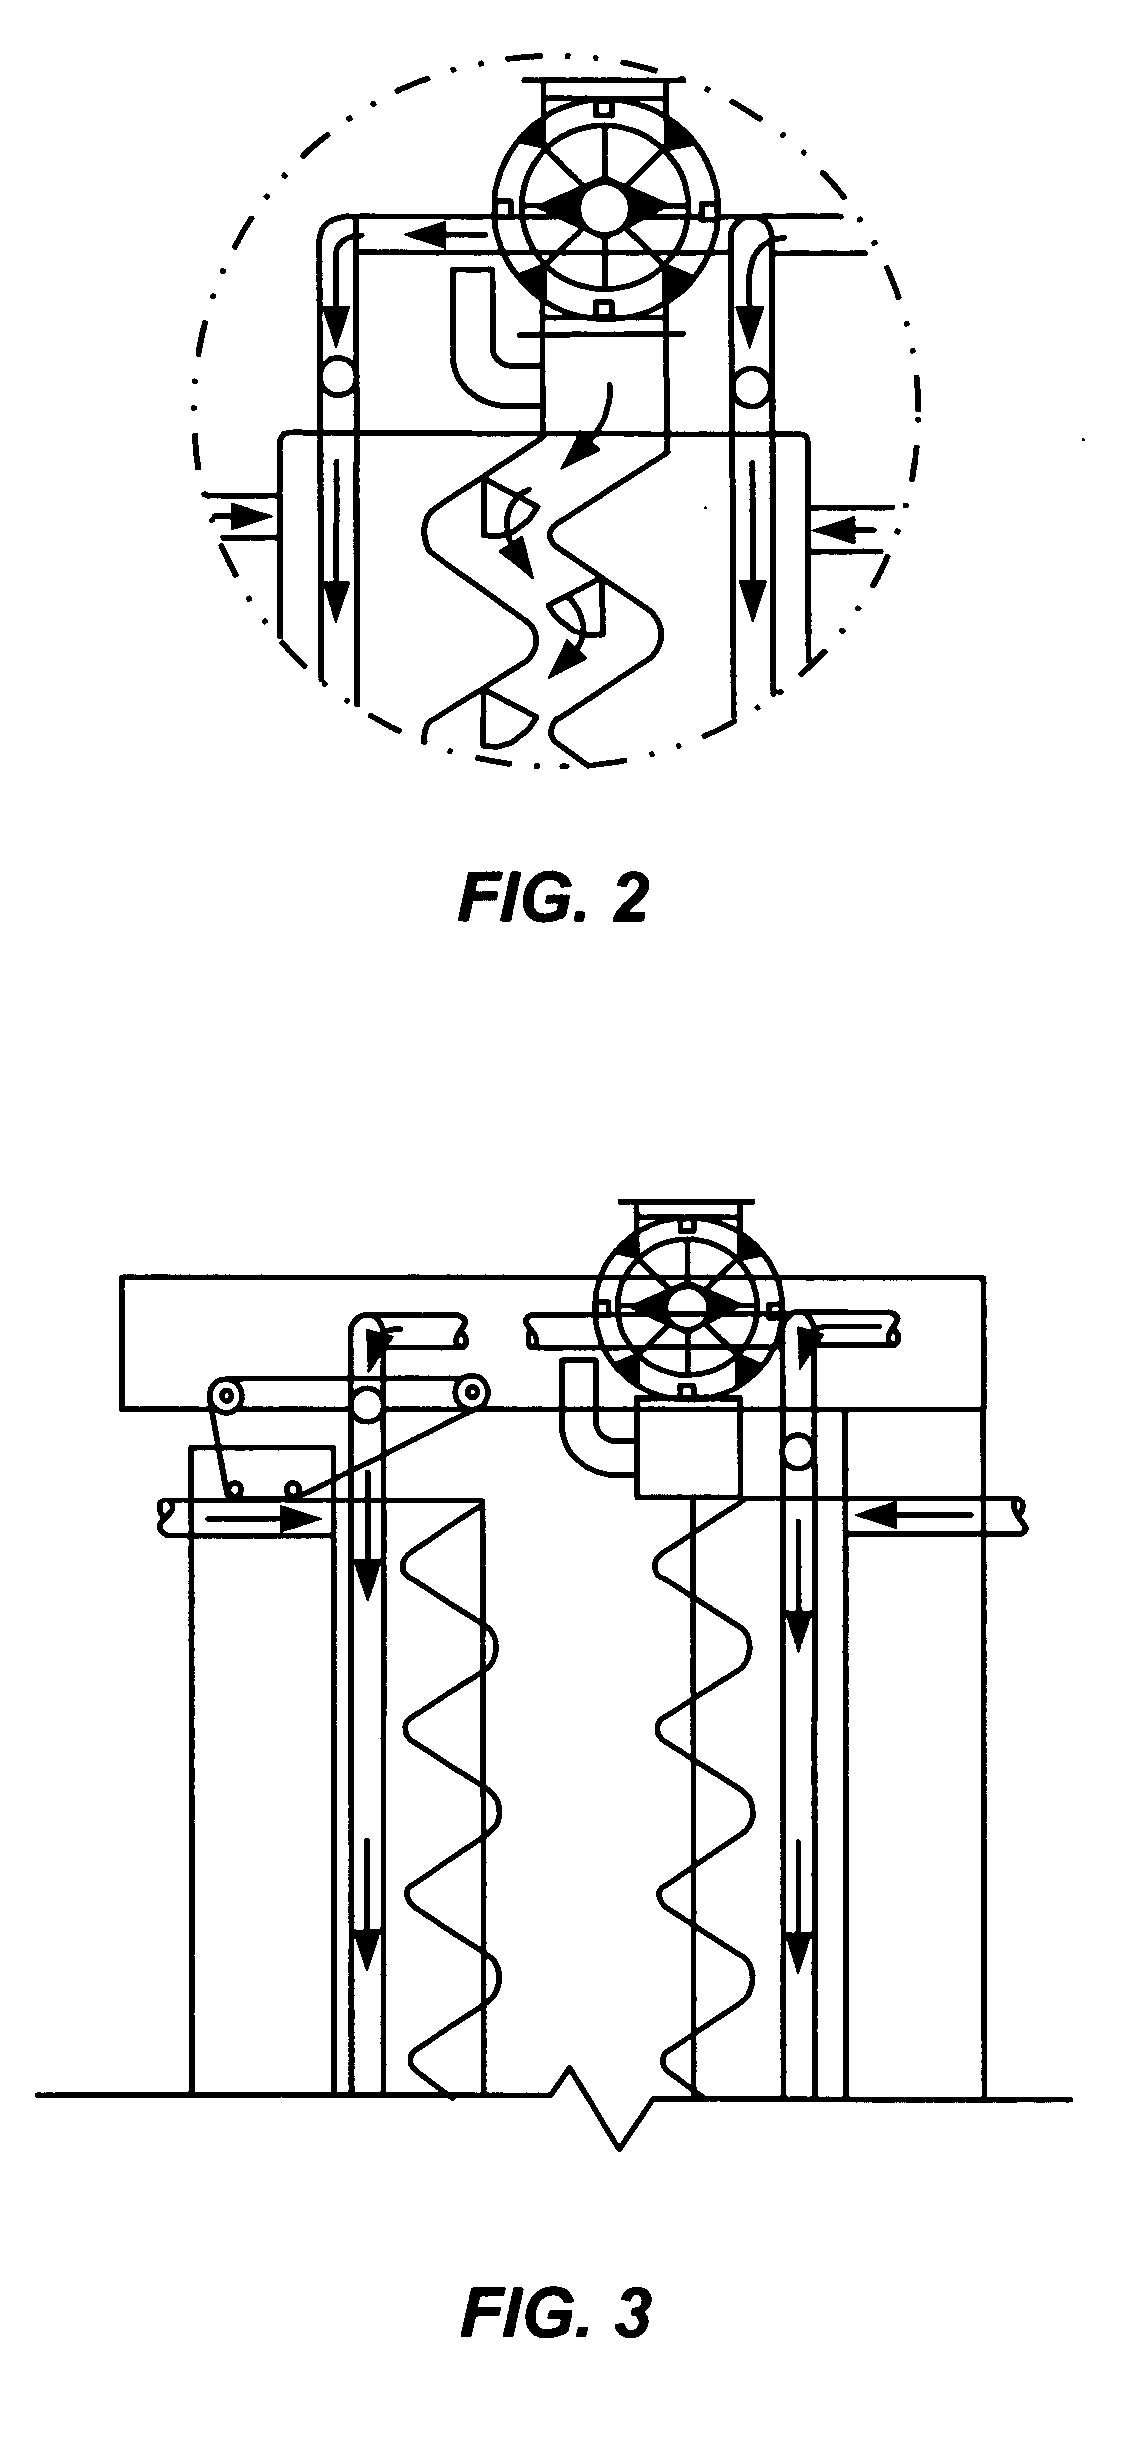 Apparatus and process for reducing microbial contamination of nuts